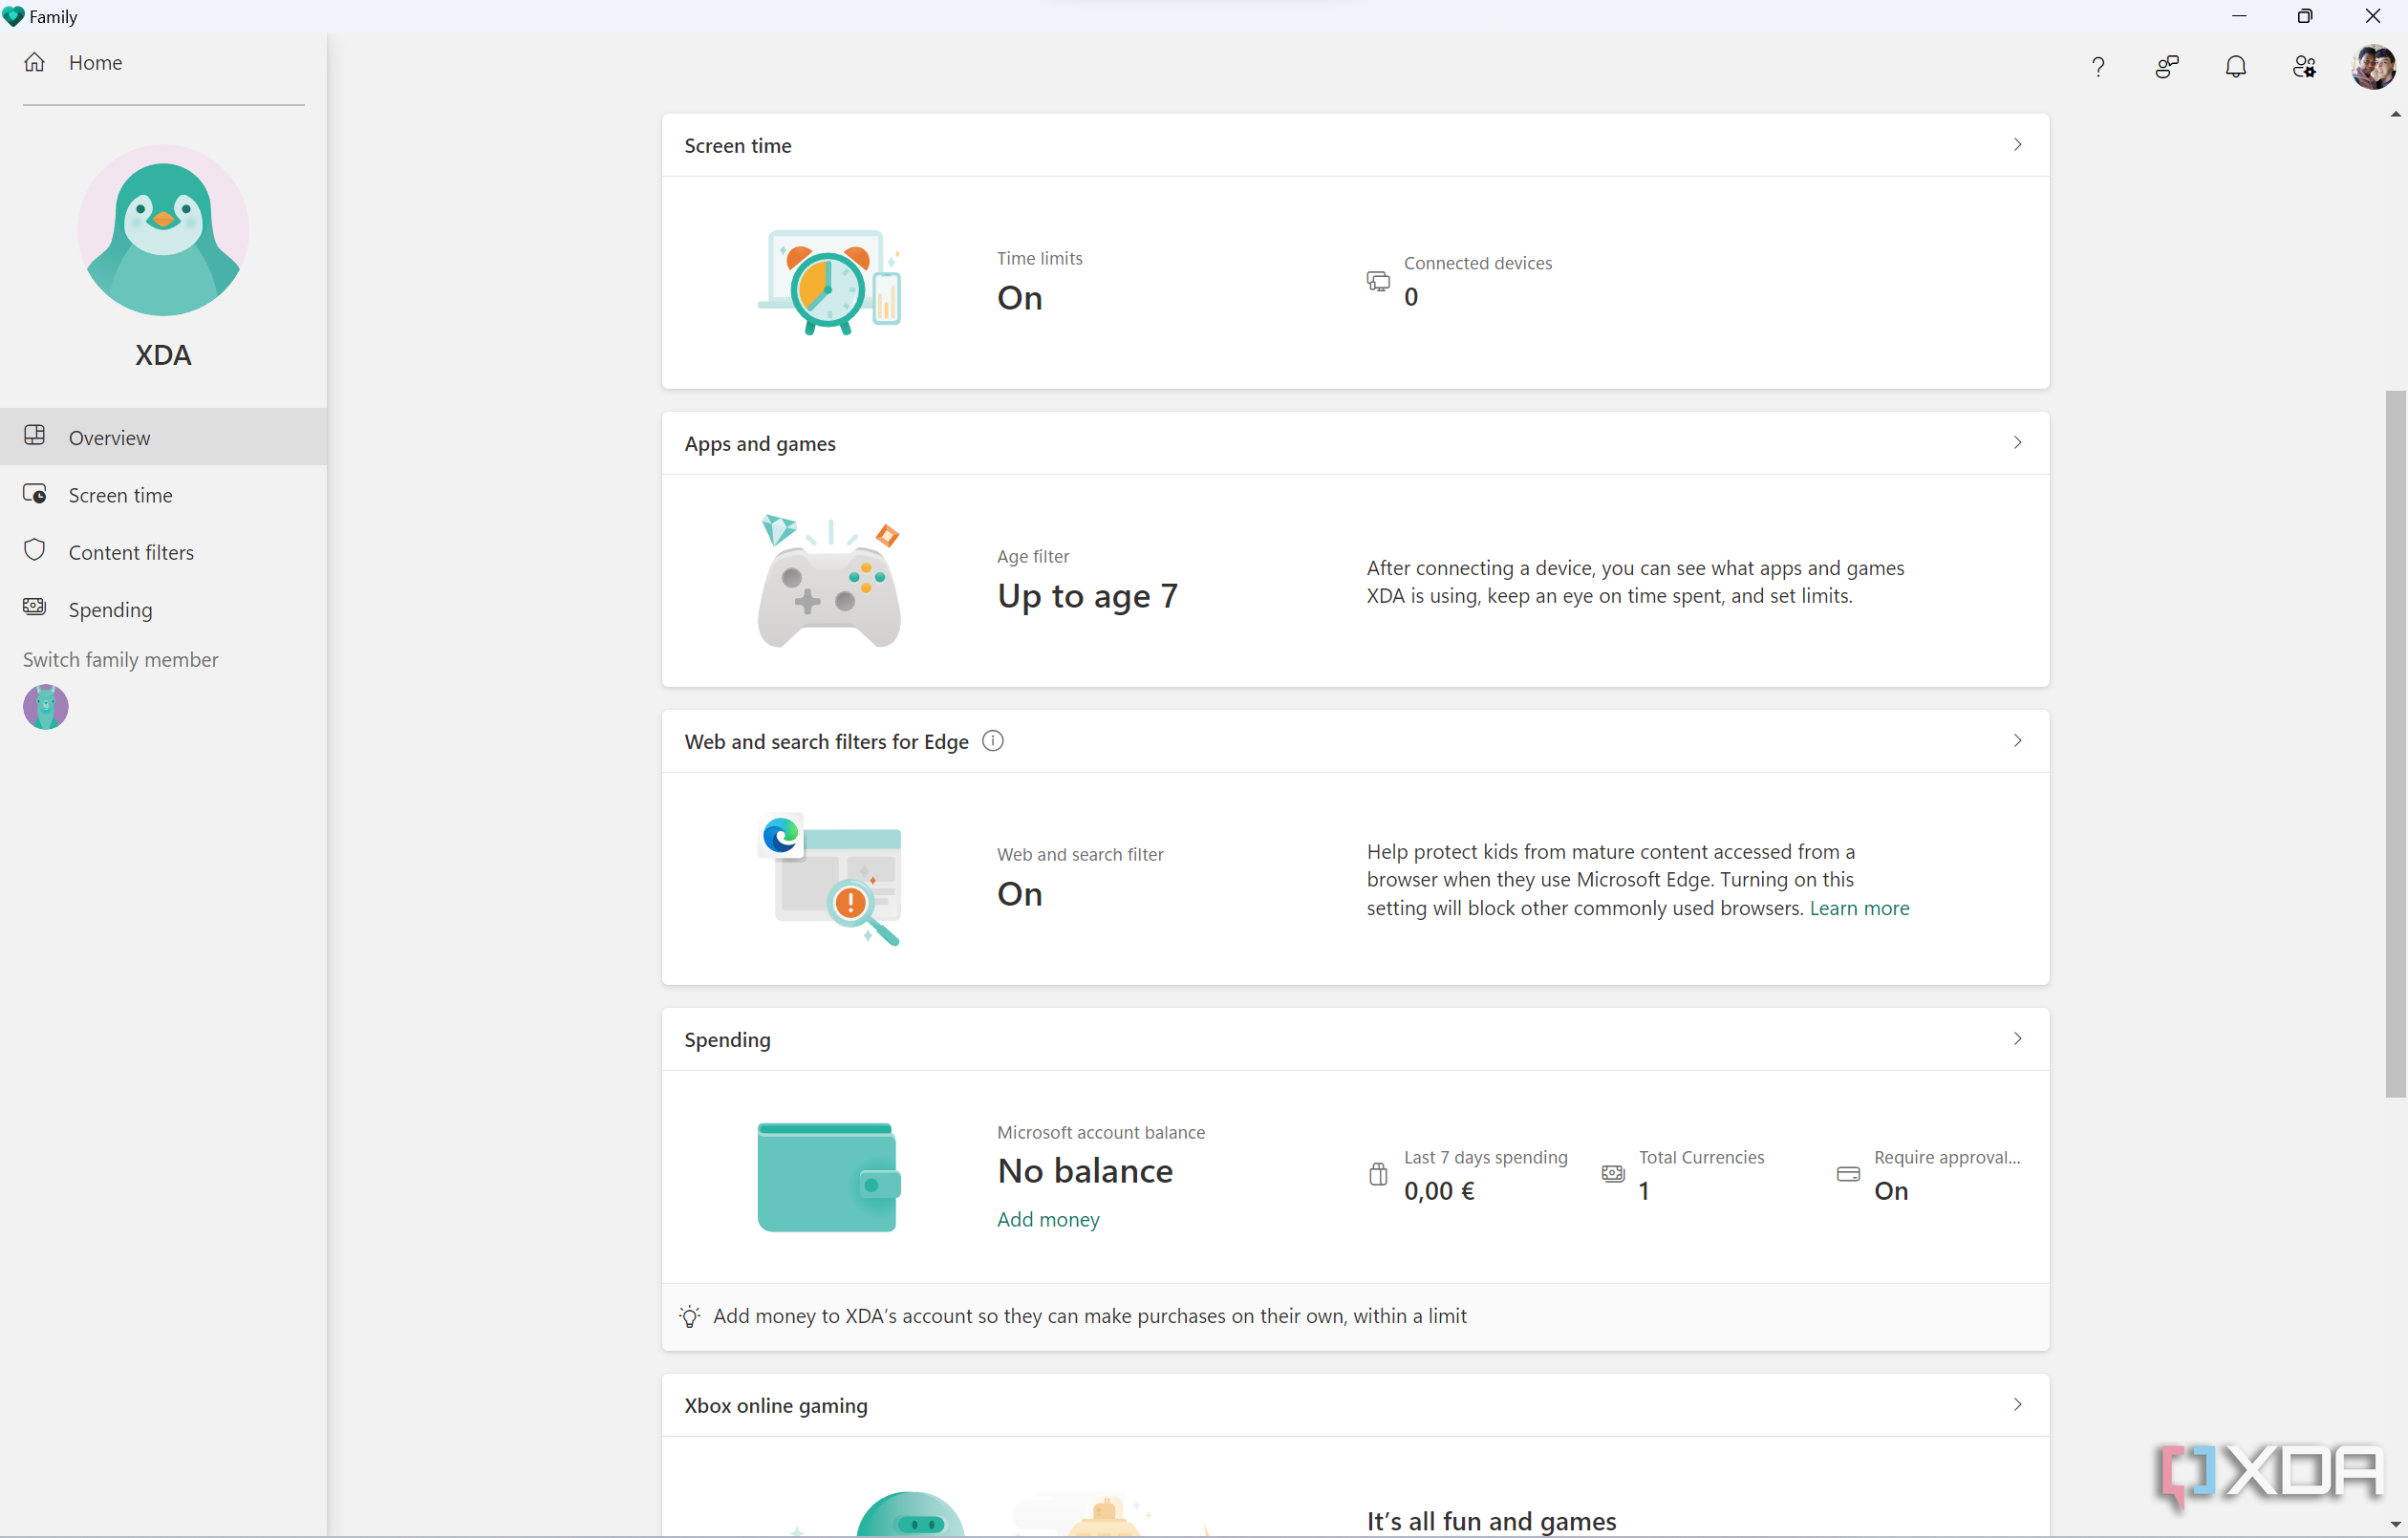 Child account overview page in Microsoft Family app